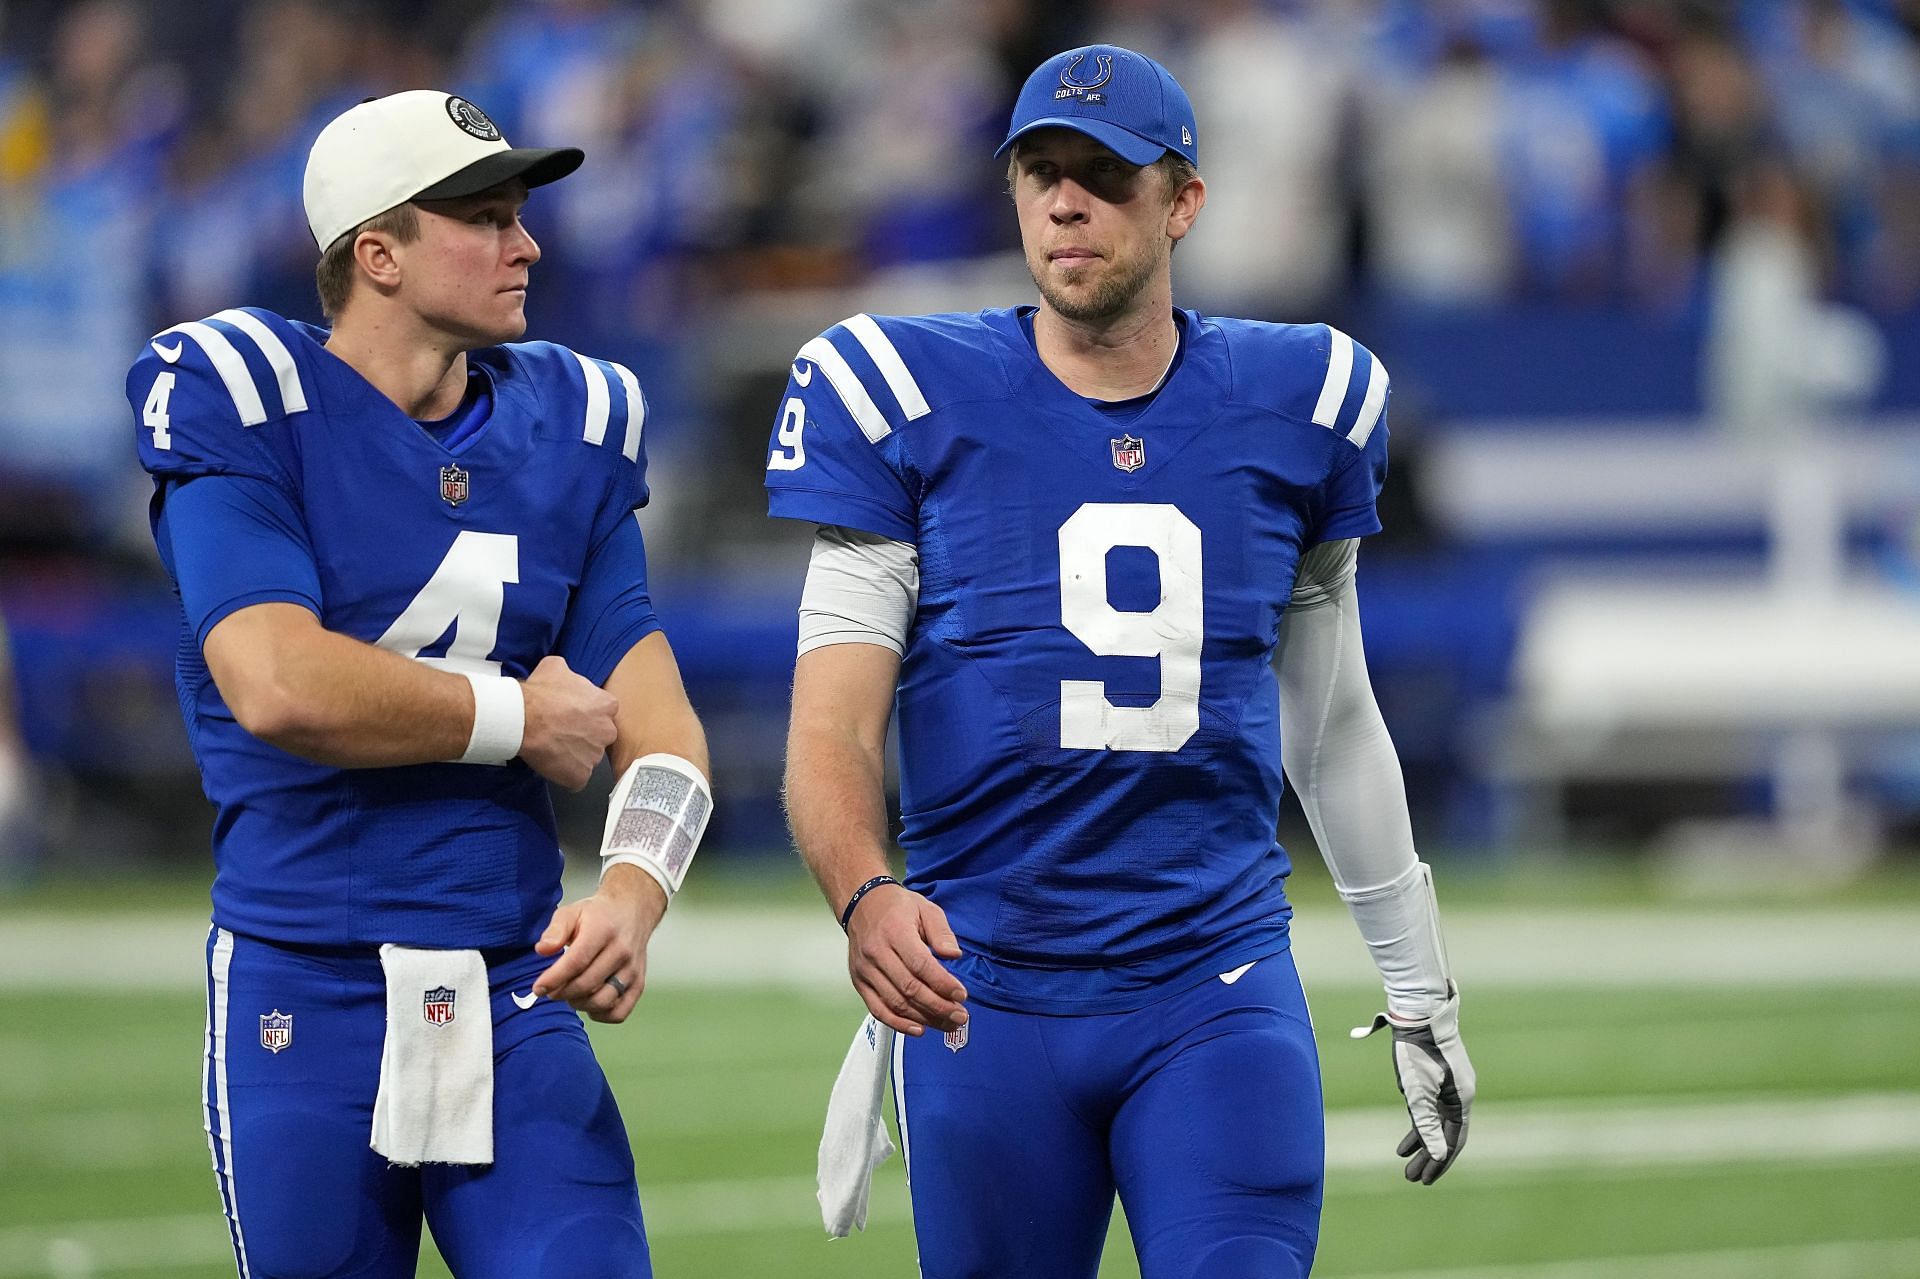 The Colts could use a better QB than Nicl Foles and Sam Ehlinger